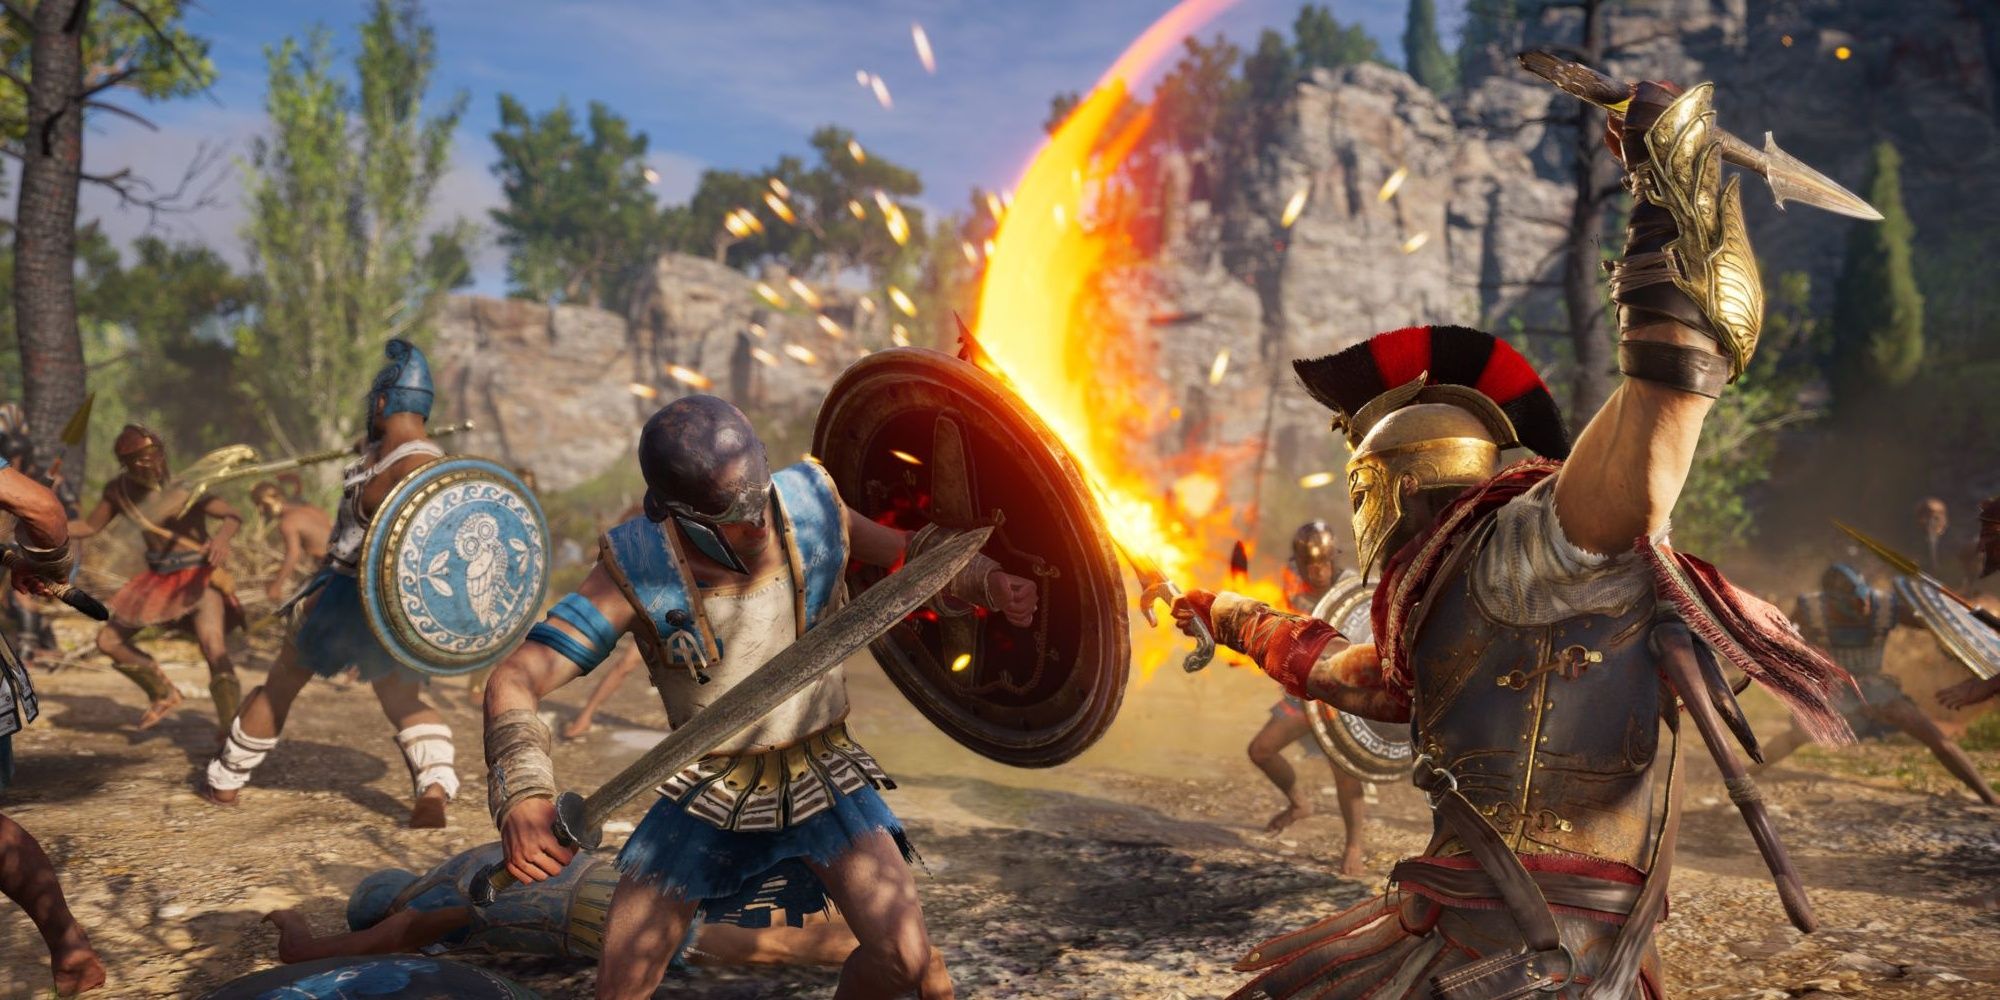 The player attacking an Athenian with a flaming sword in Assassin's Creed: Odyssey